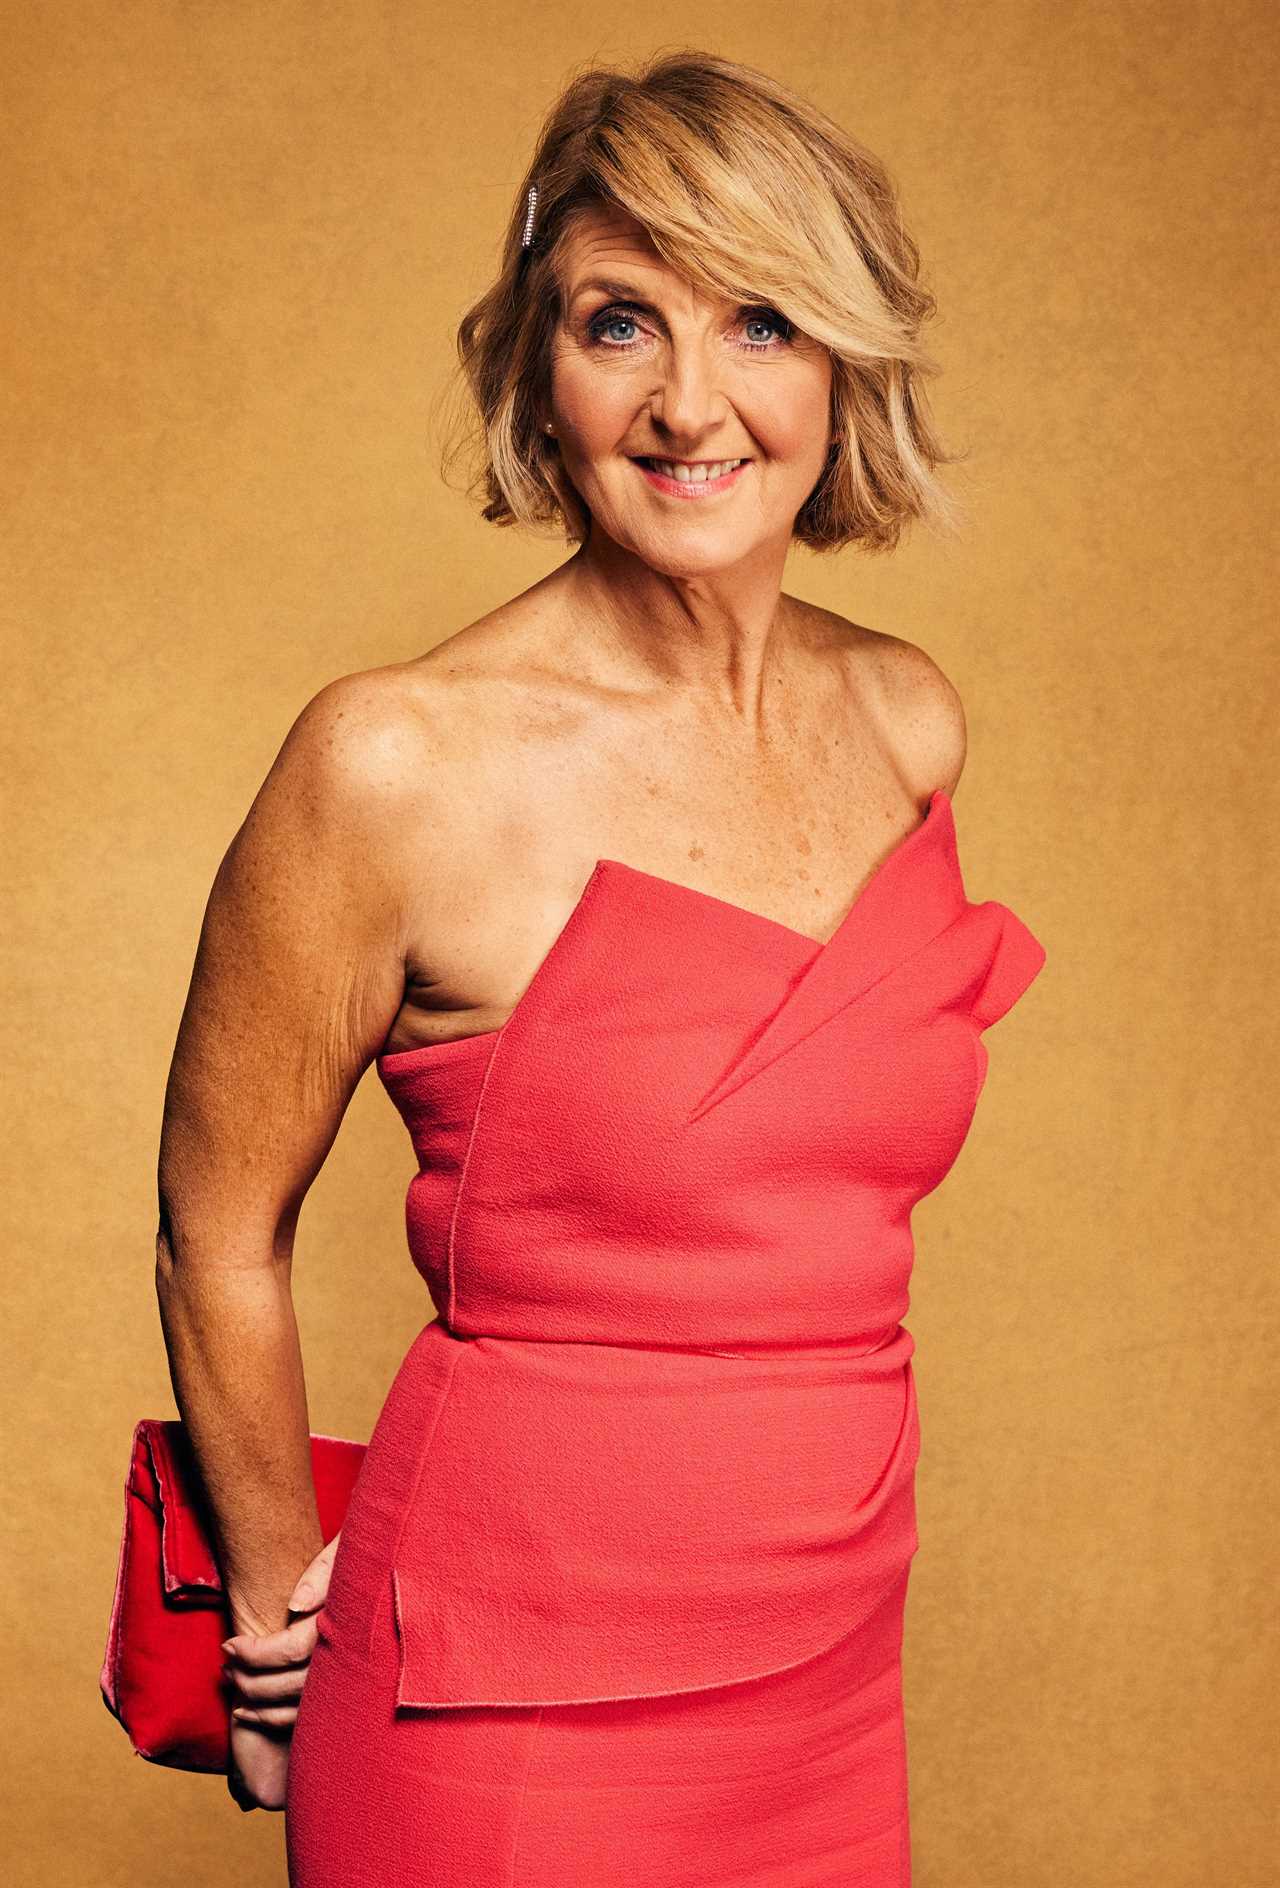 Shirley Ballas is a flirt with Strictly’s male dancers but she has NOTHING to apologise for, says Kaye Adams